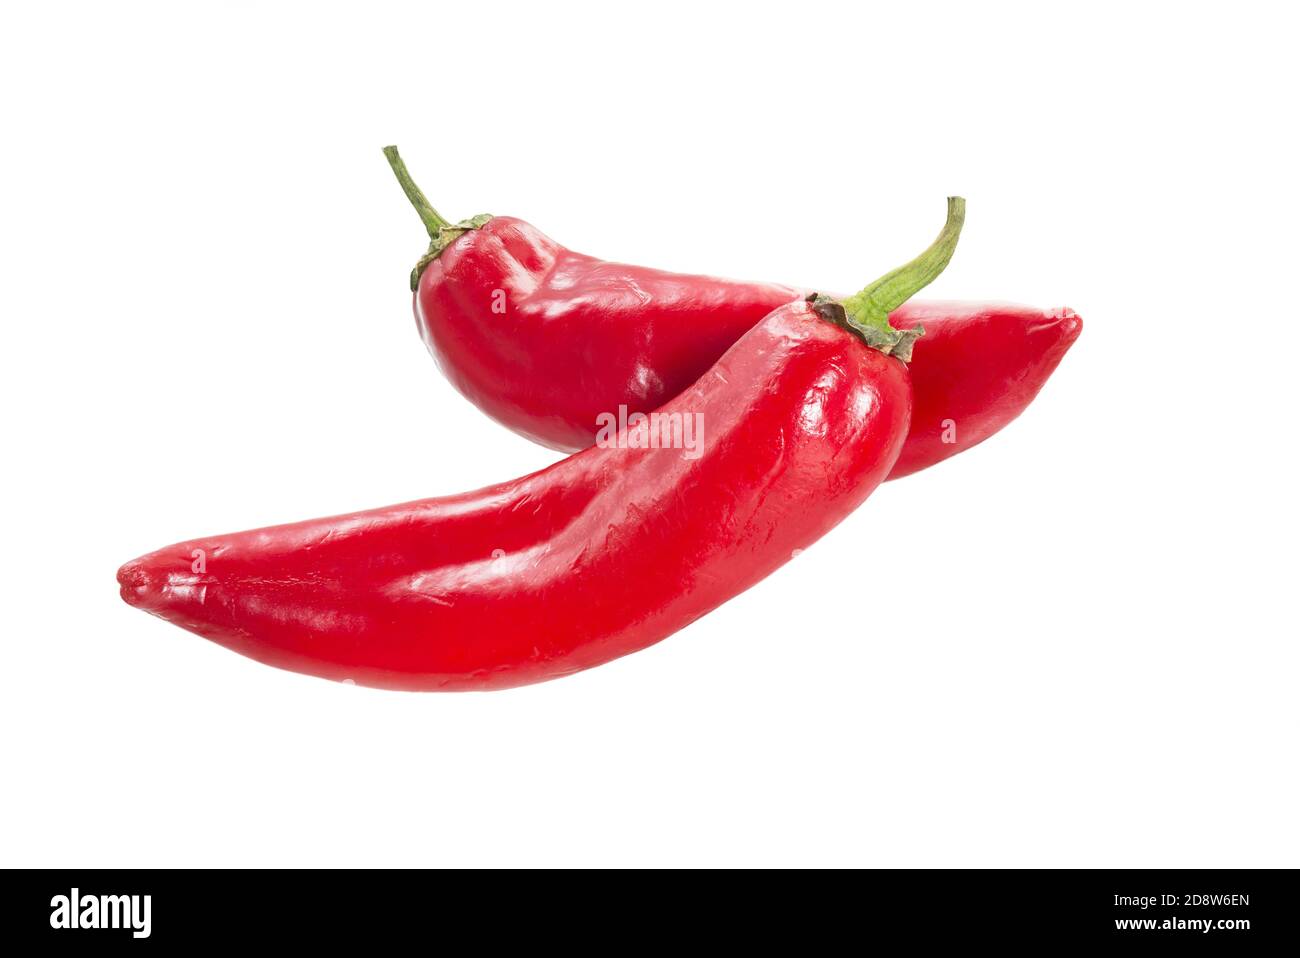 Chili pepper isolated on a white background. Red Chili hot pepper clipping path. Fresh pepper. Stock Photo